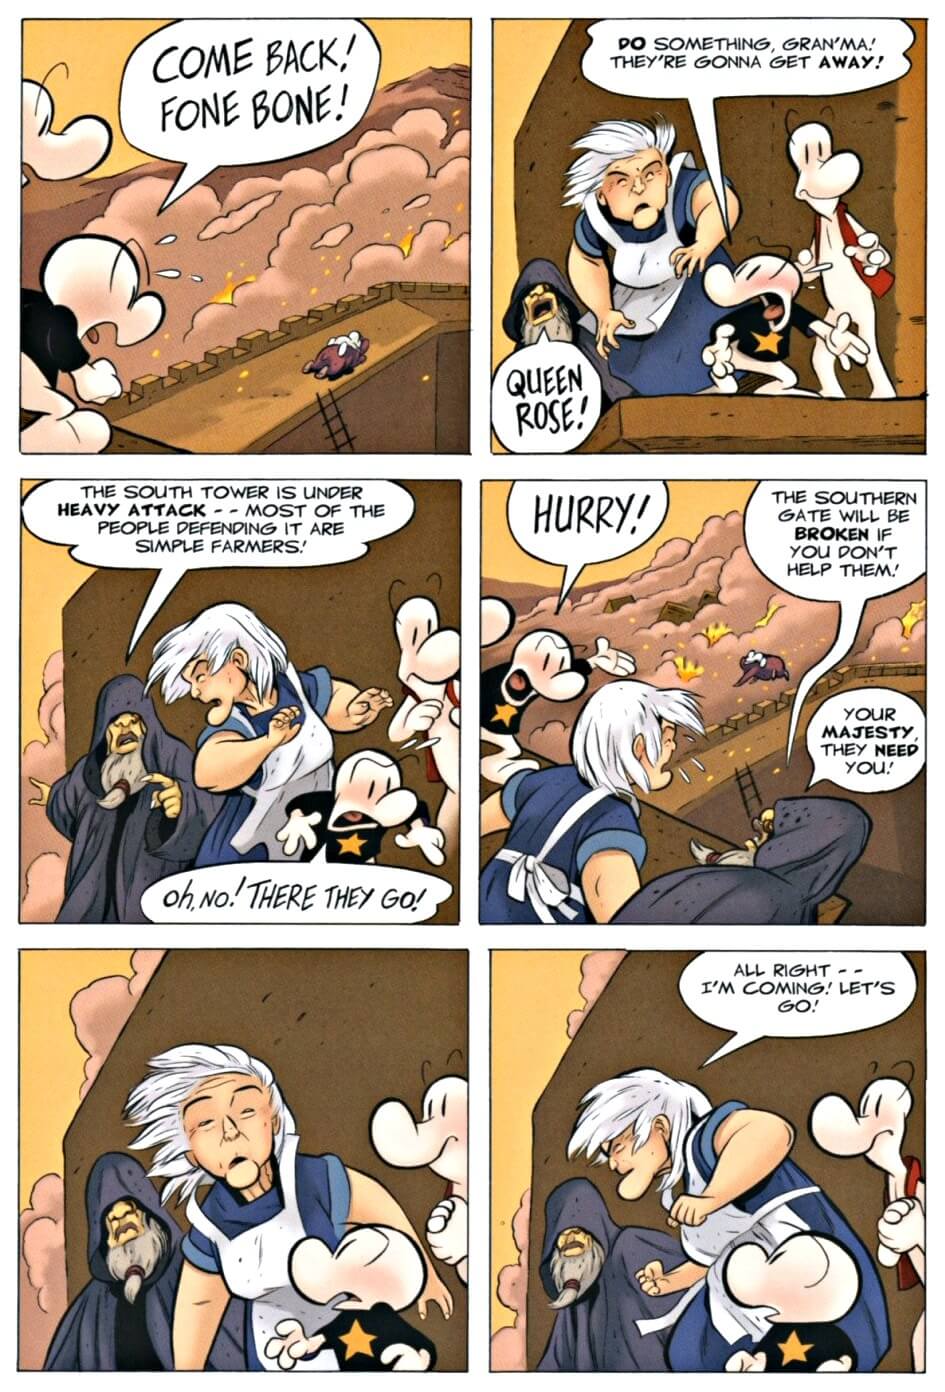 page 83 chapter 3 of bone 9 crown of horns graphic novel